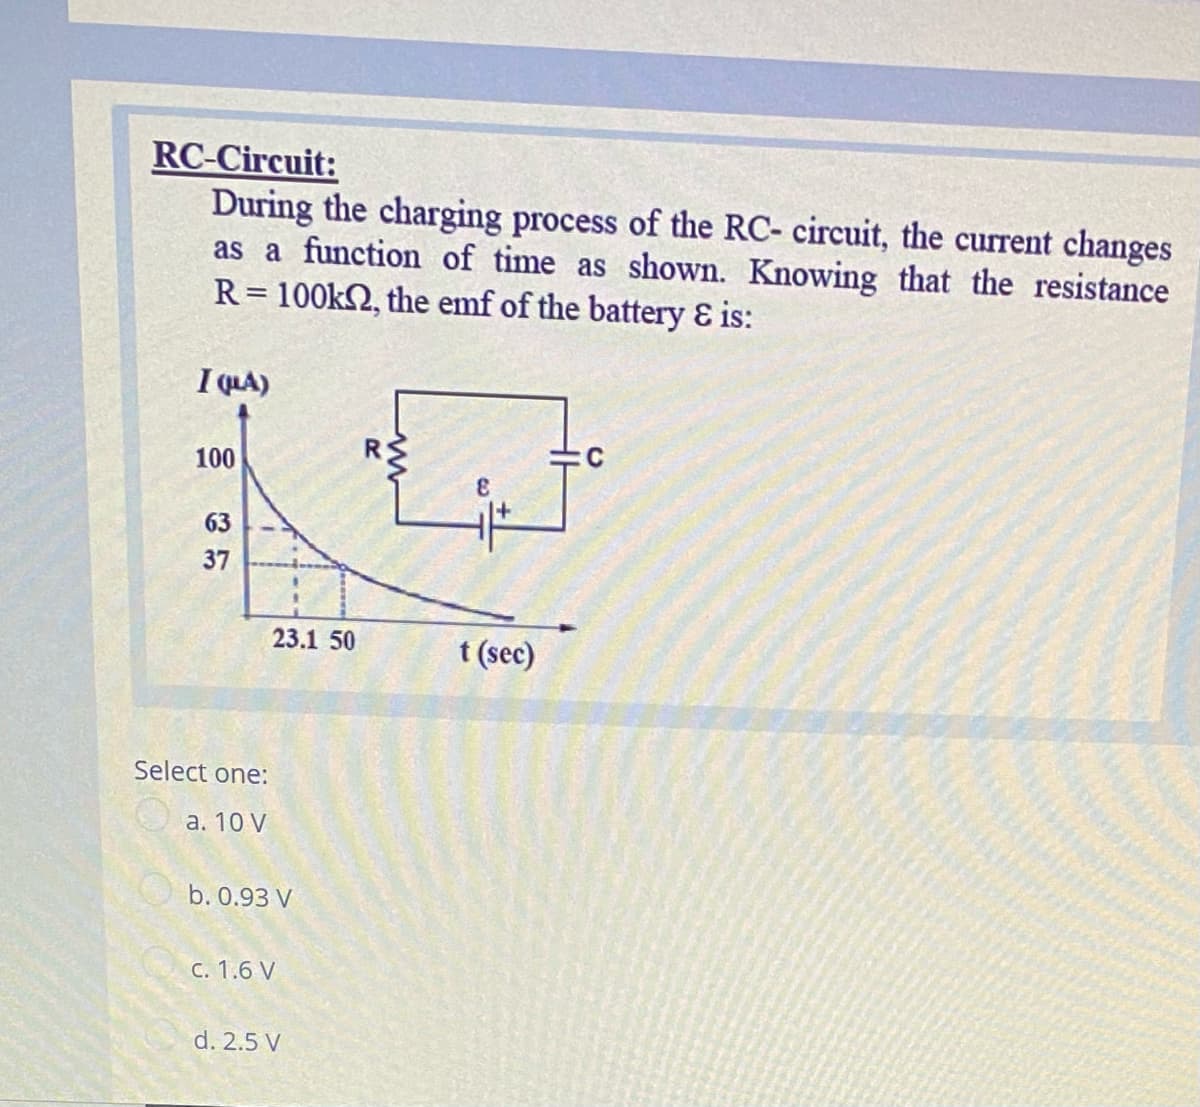 RC-Circuit:
During the charging process of the RC- circuit, the current changes
as a function of time as shown. Knowing that the resistance
R= 100k2, the emf of the battery & is:
I QLA)
100
63
37
23.1 50
t (sec)
Select one:
а. 10 V
b. 0.93 V
С. 1.6 V
d. 2.5 V
